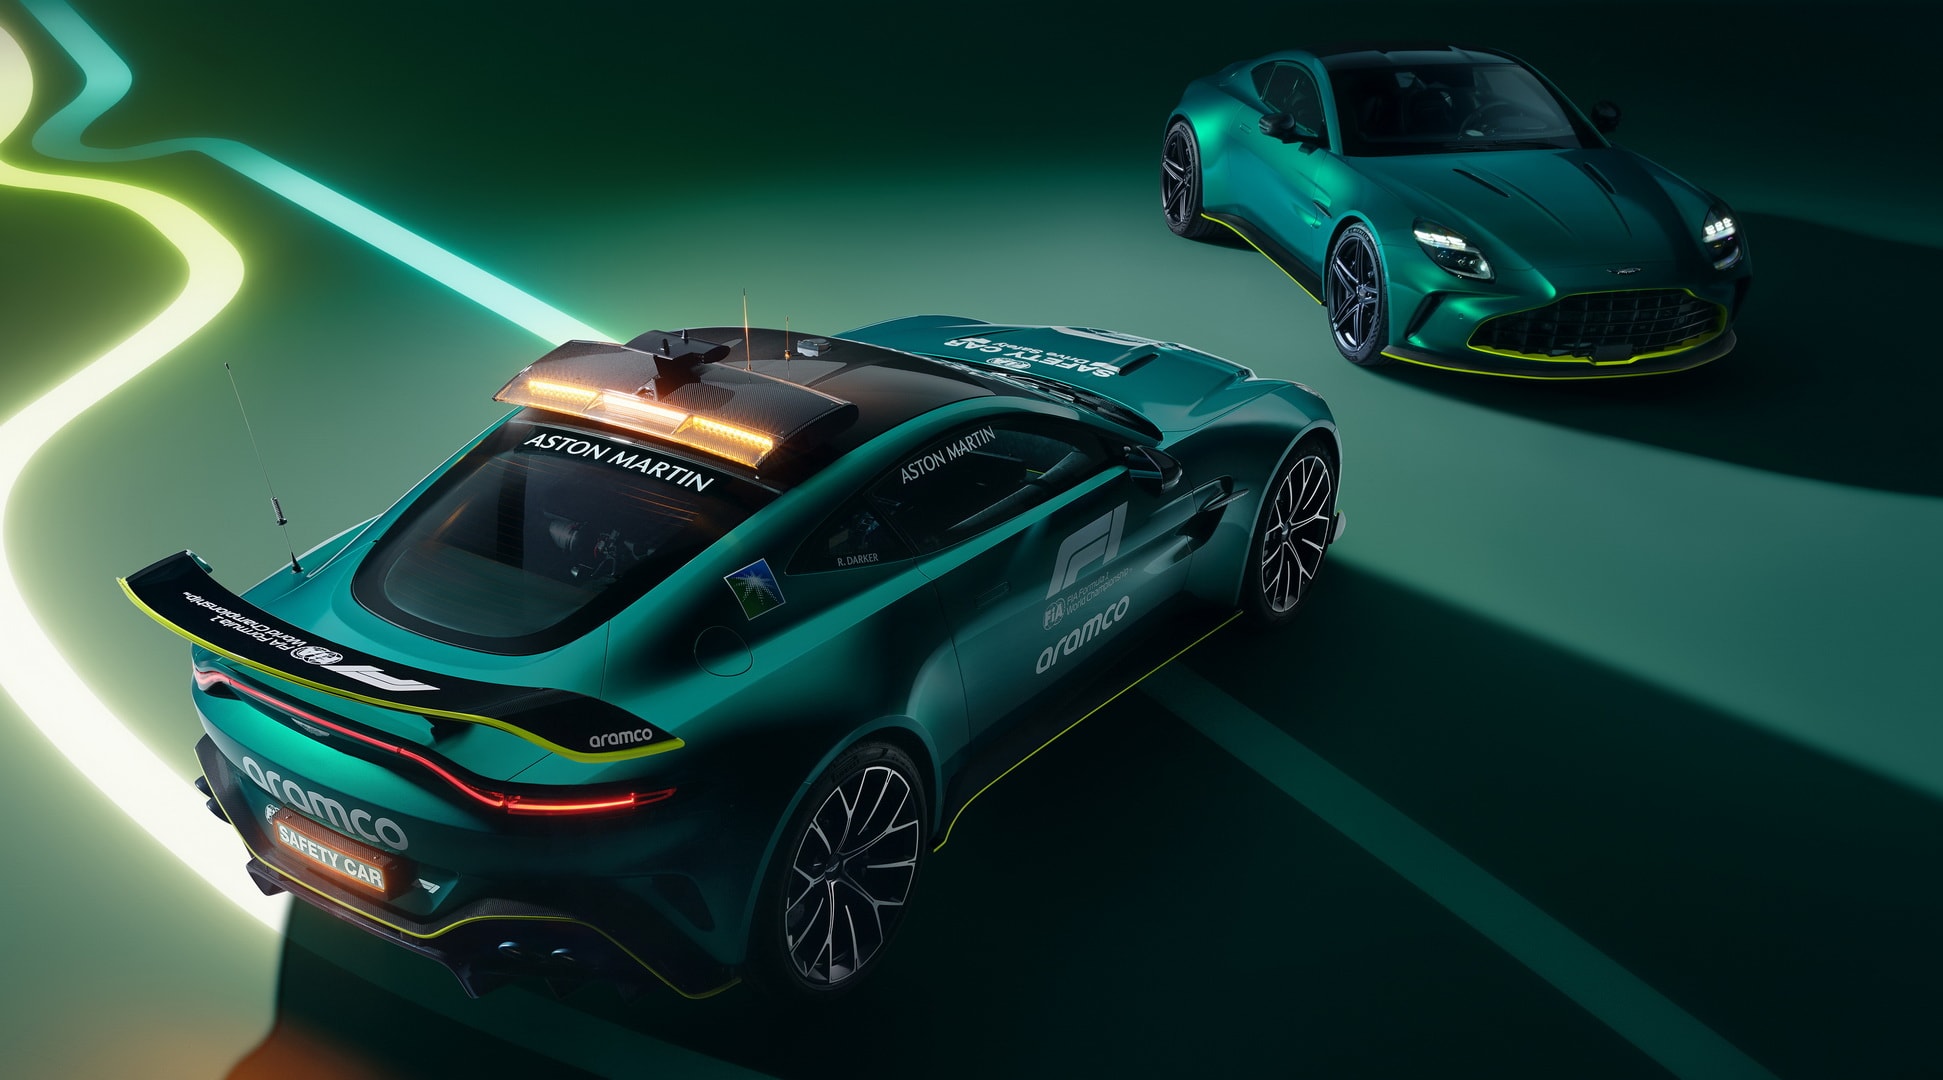  All New Vantage F1 Safety Car Is The Only Aston Martin That Can Keep Max Verstappen Behind 10 